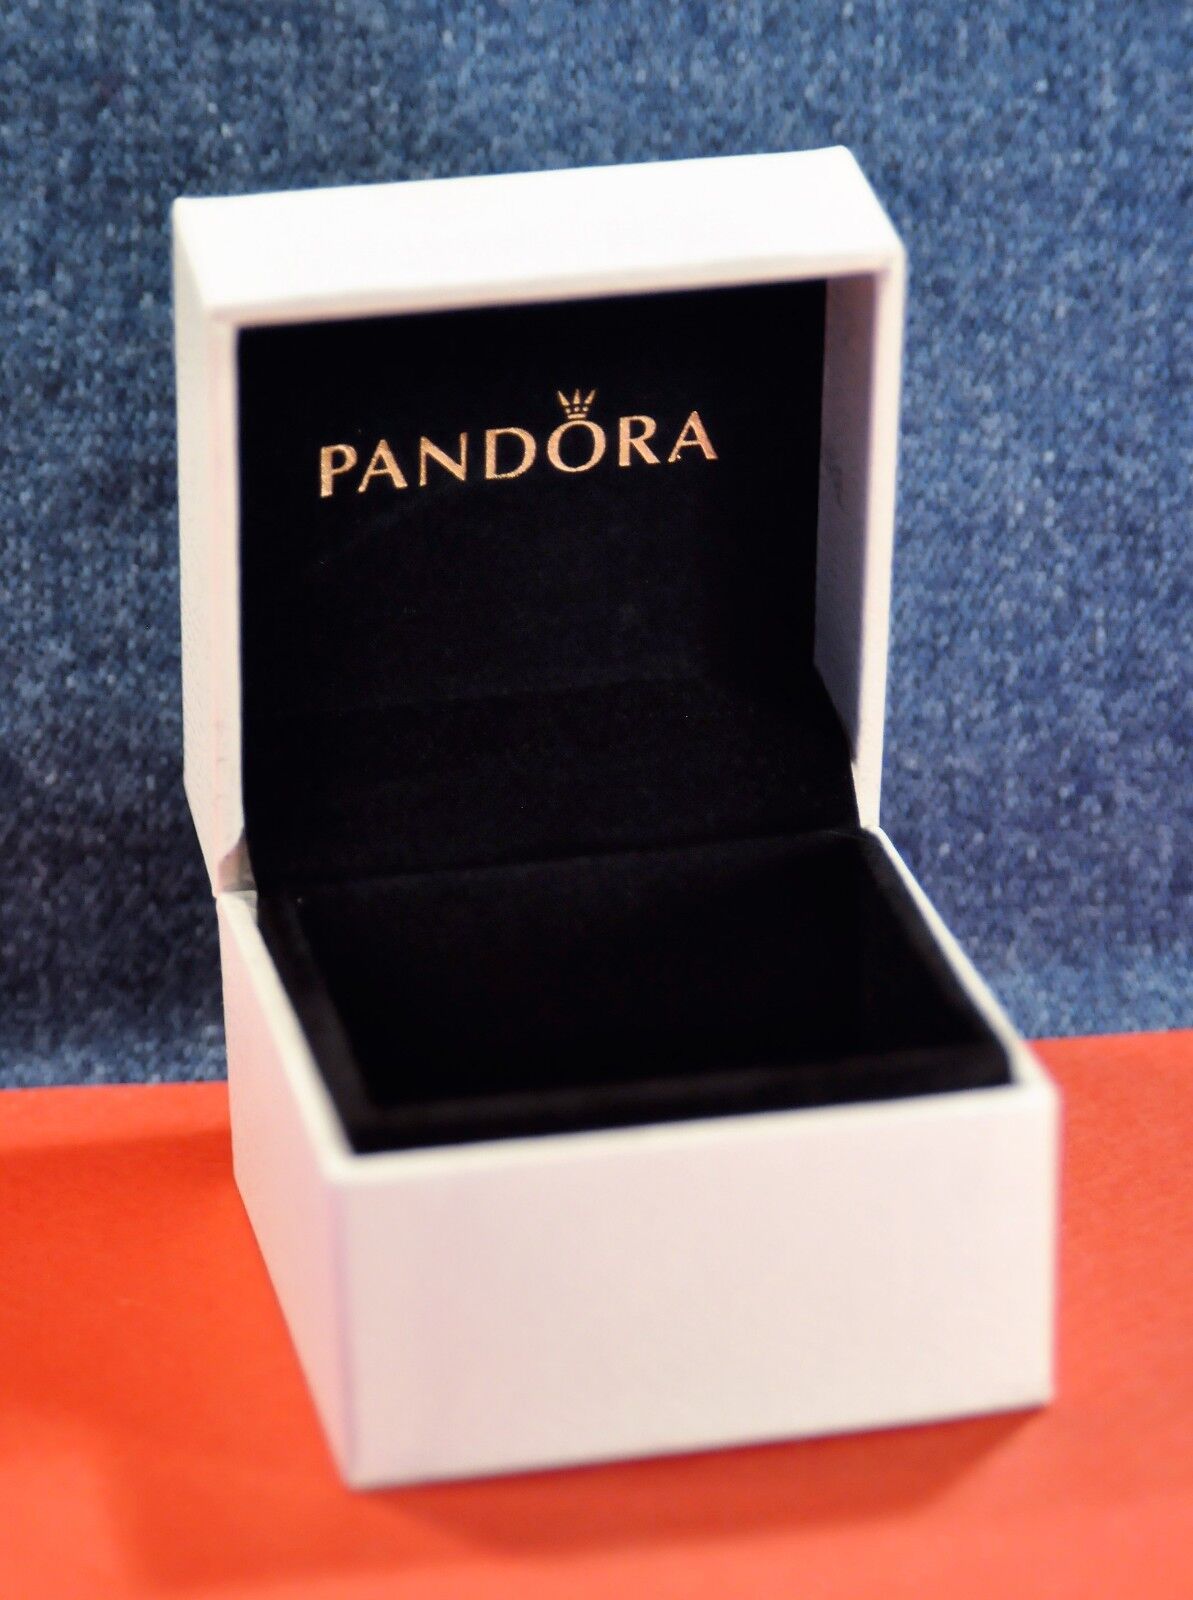 Pandora’s Box Jewelry: A Look at Their Collections and Styles缩略图